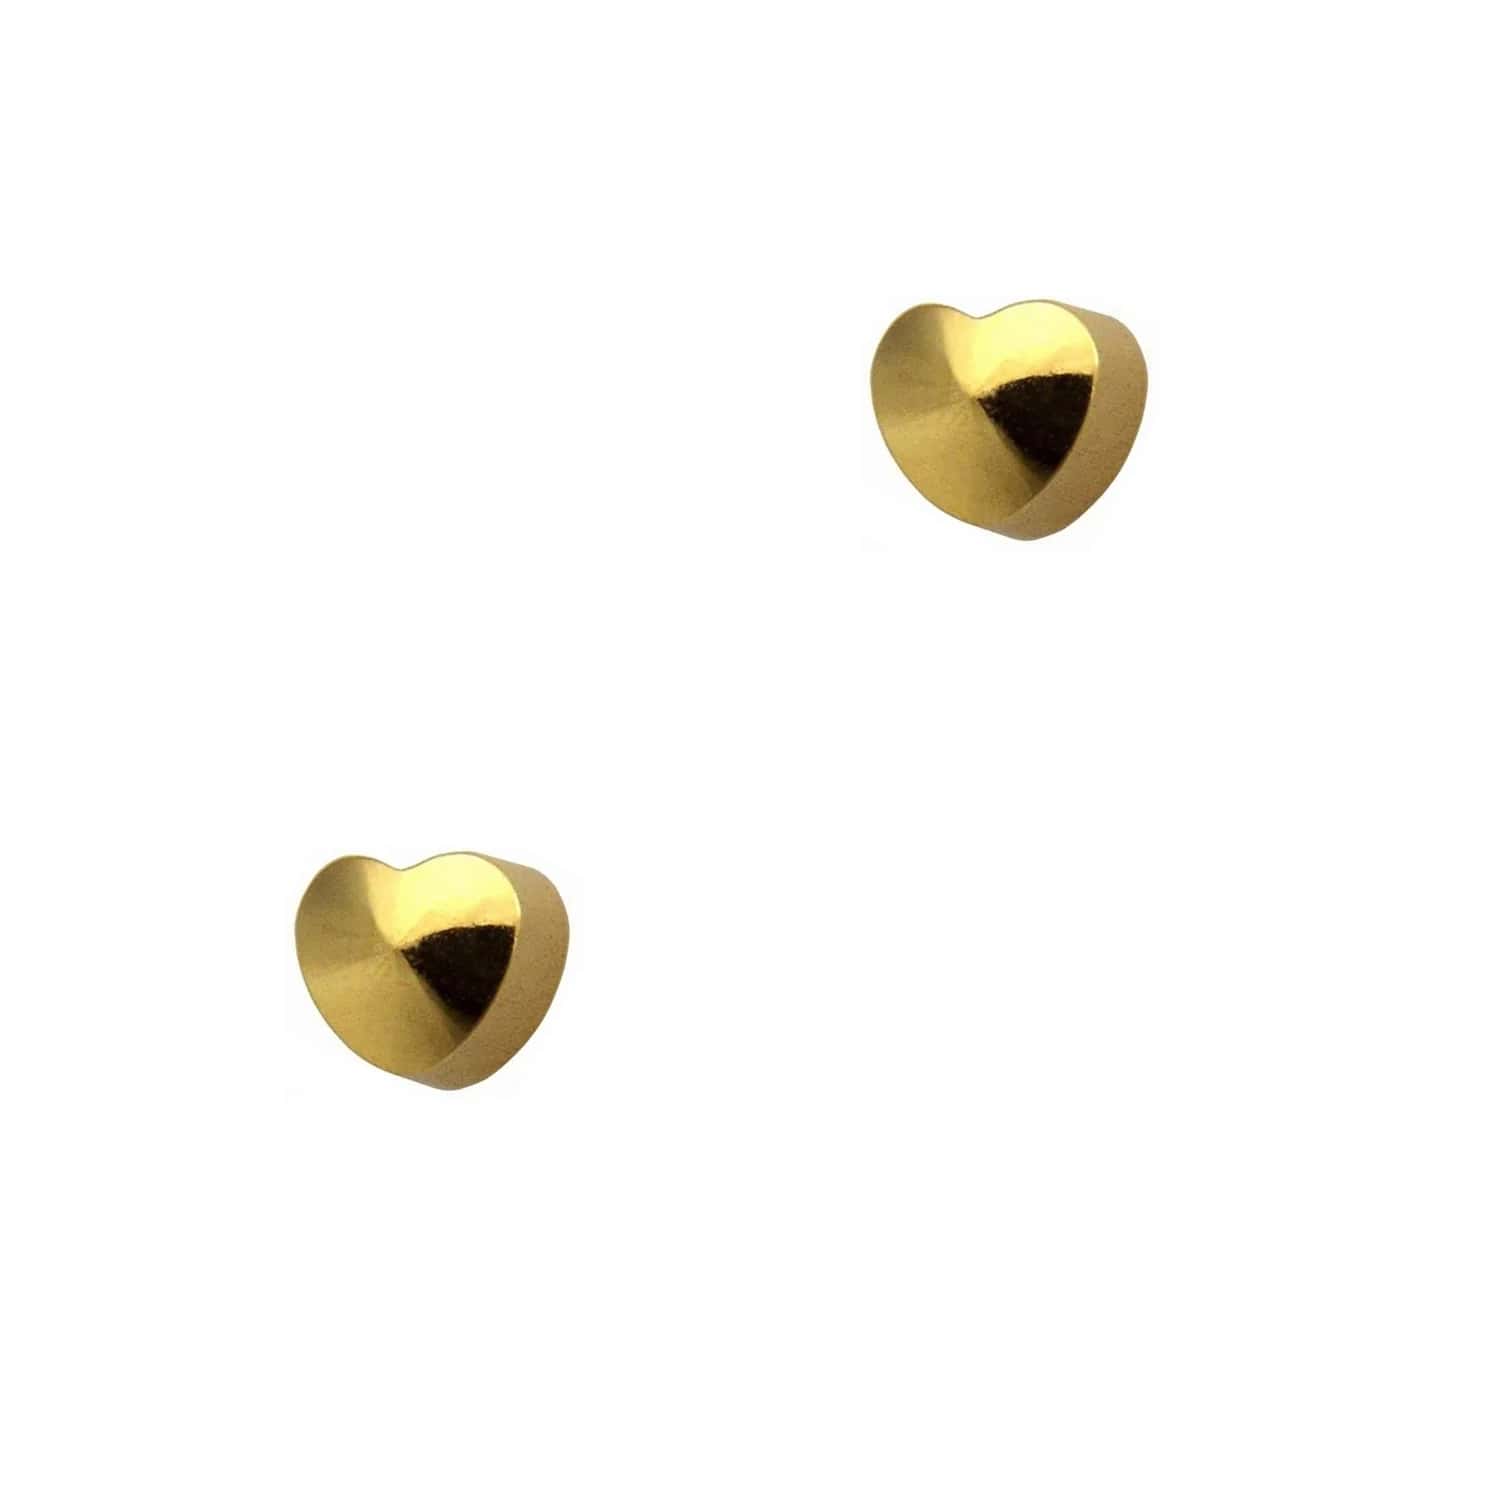 STUDEX MINI Gold Plated Stainless Steel Heart and Star Shaped Earrings